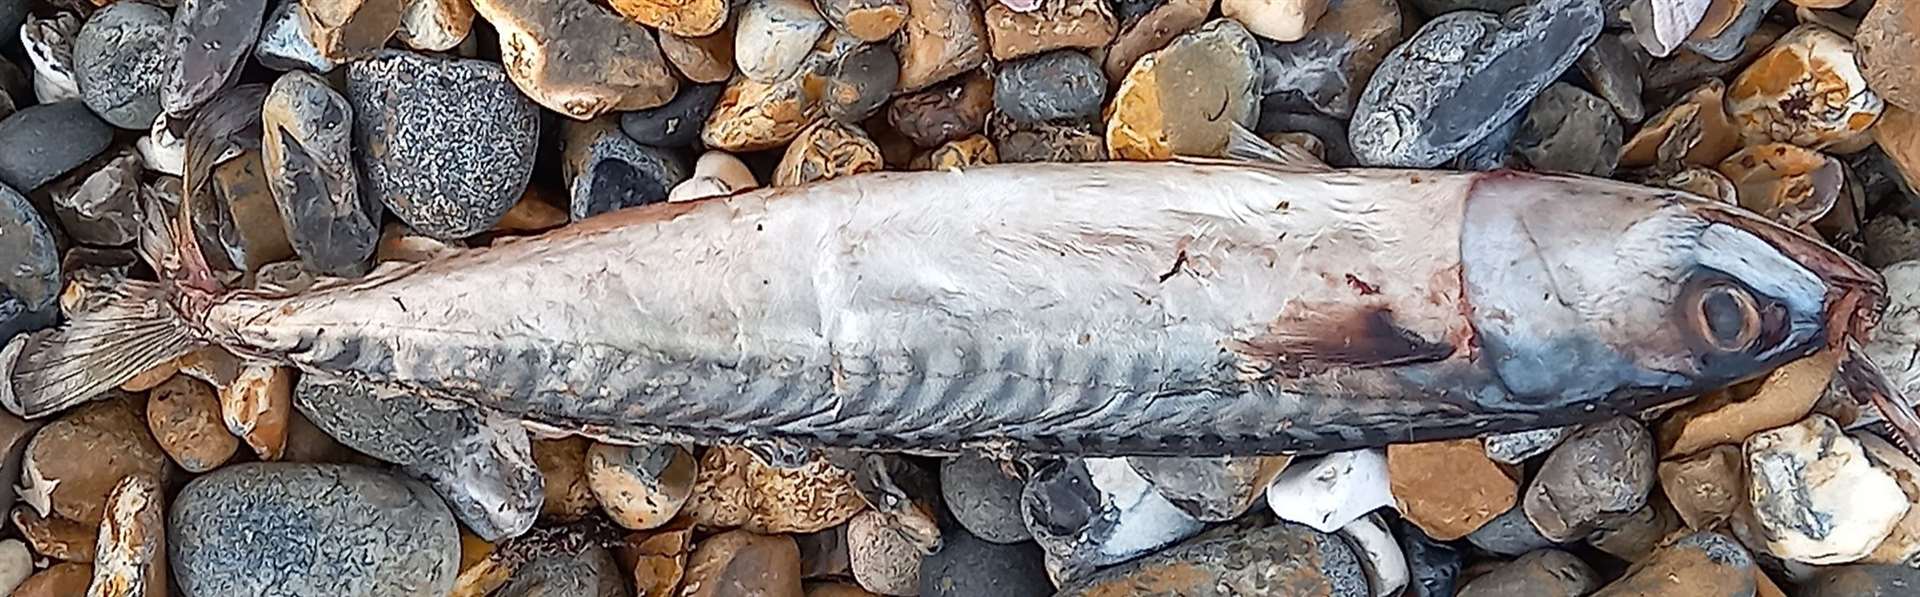 This fish was found within metres of the other deceased sea life. Picture: Brandon Whitfield